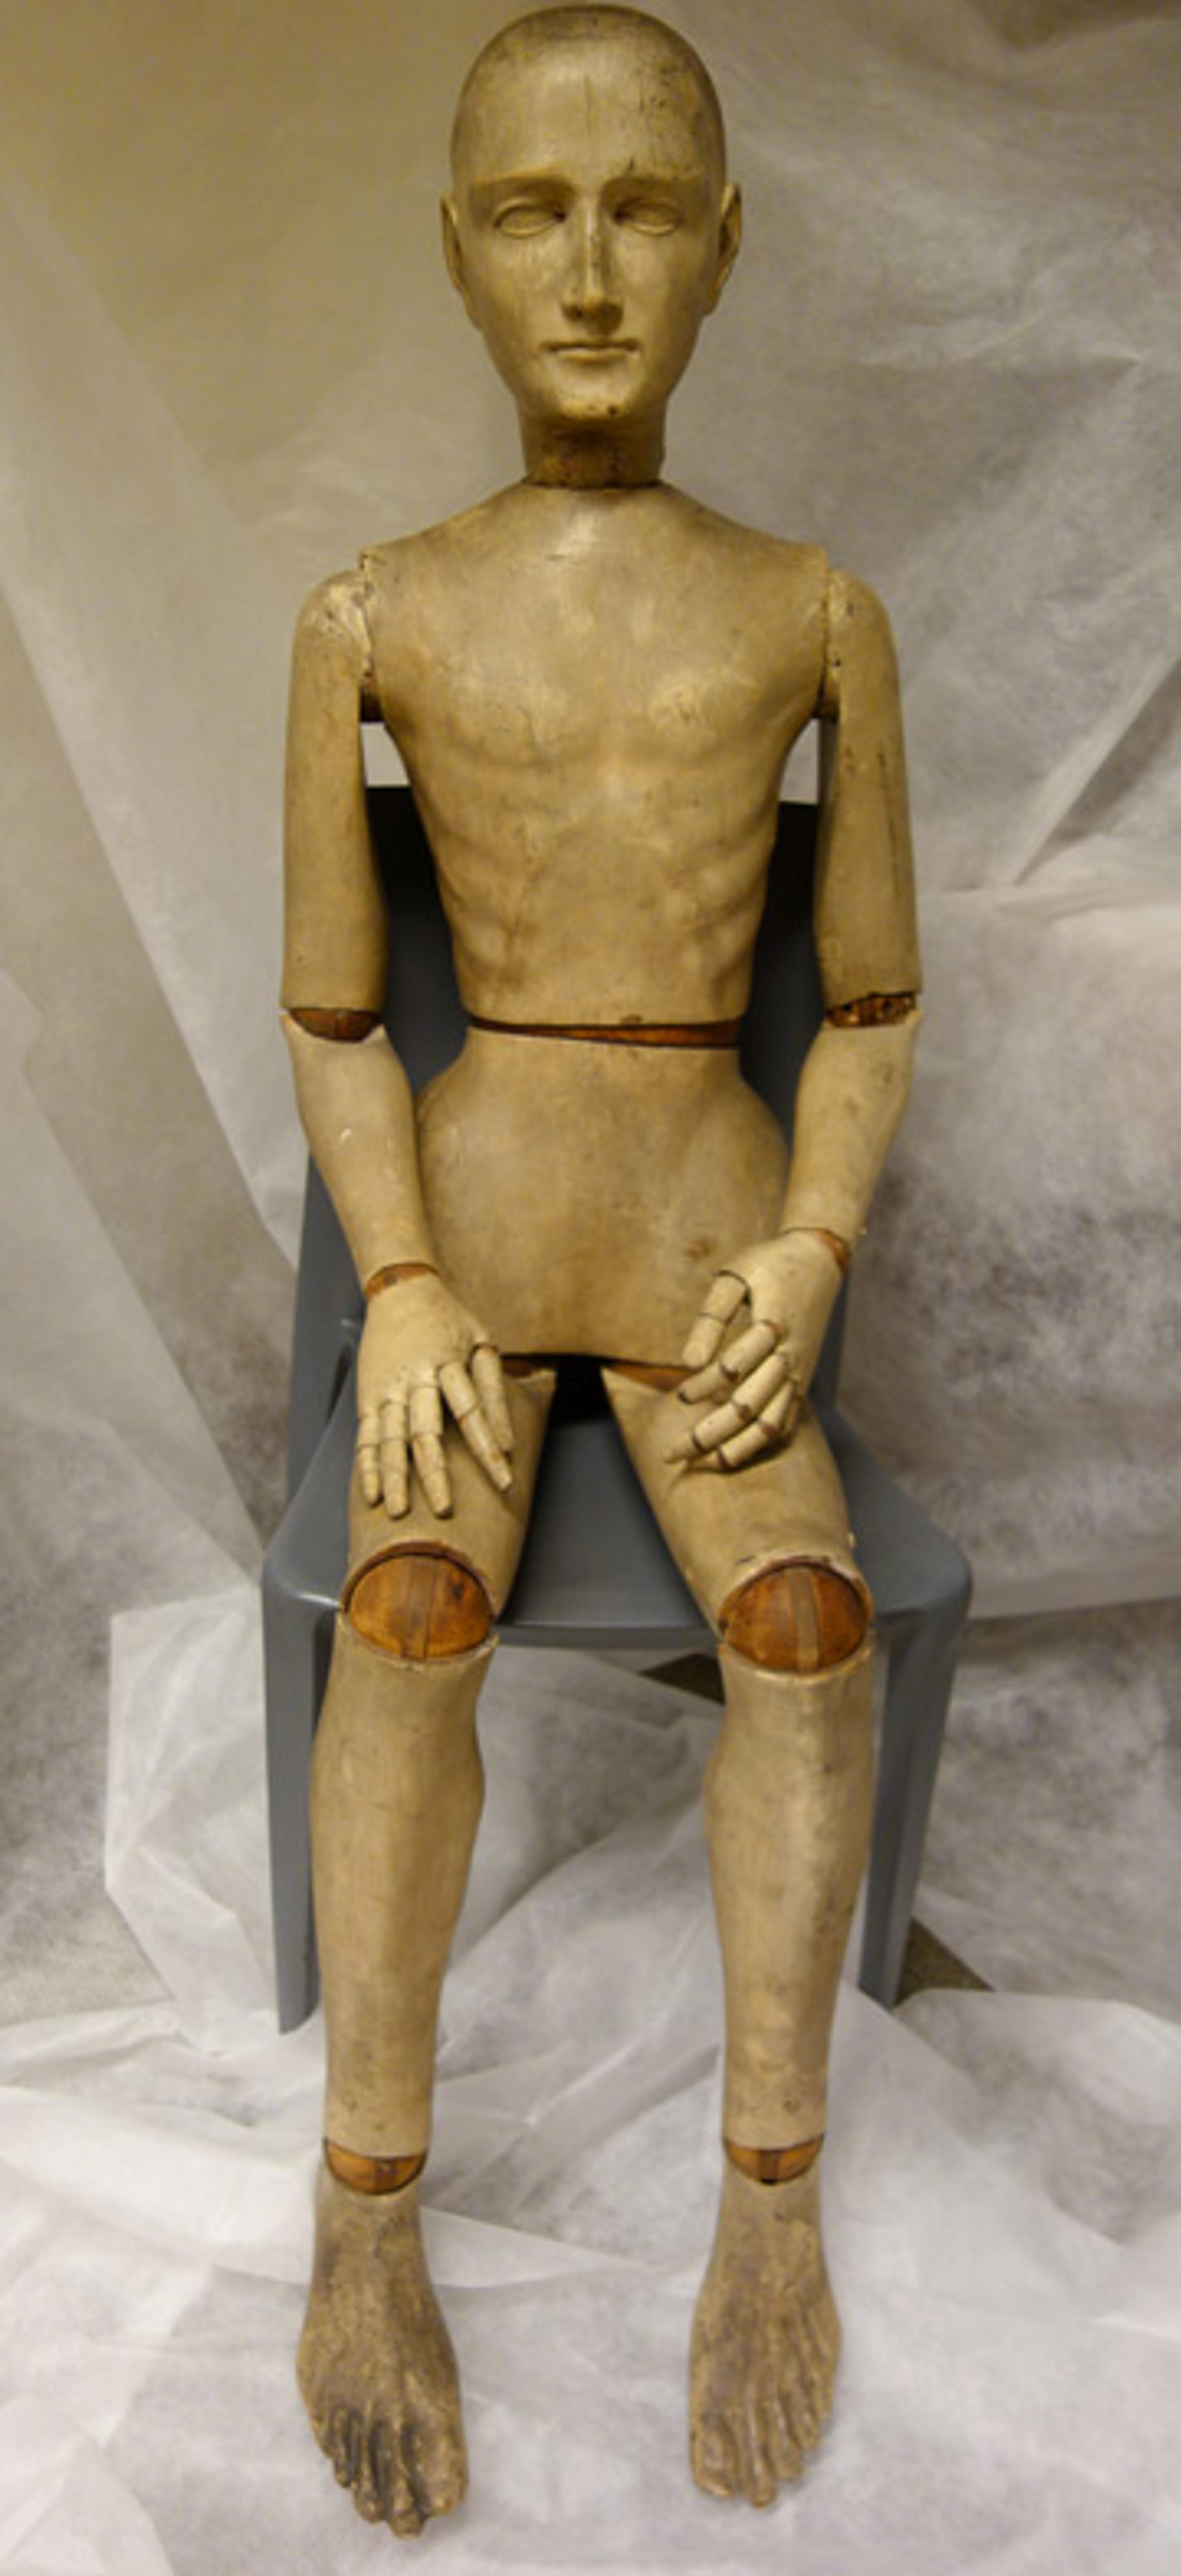 A full-body view of a 19th-century French mannequin made of wood